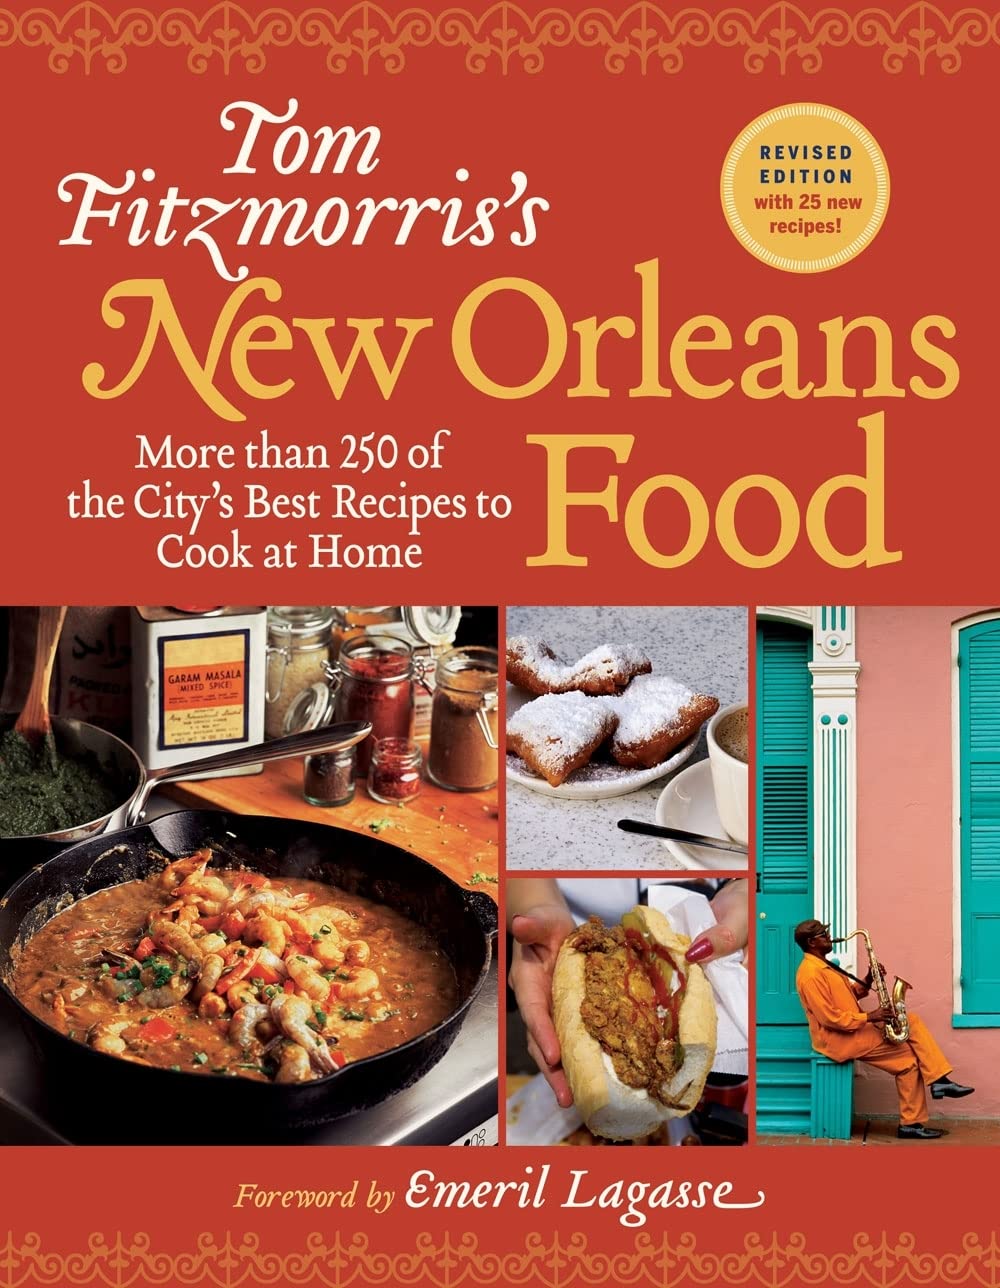 Tom Fitzmorris's New Orleans Food (Revised Edition): More Than 250 of the City's Best Recipes to Cook at Home by Tom Fitzmorris